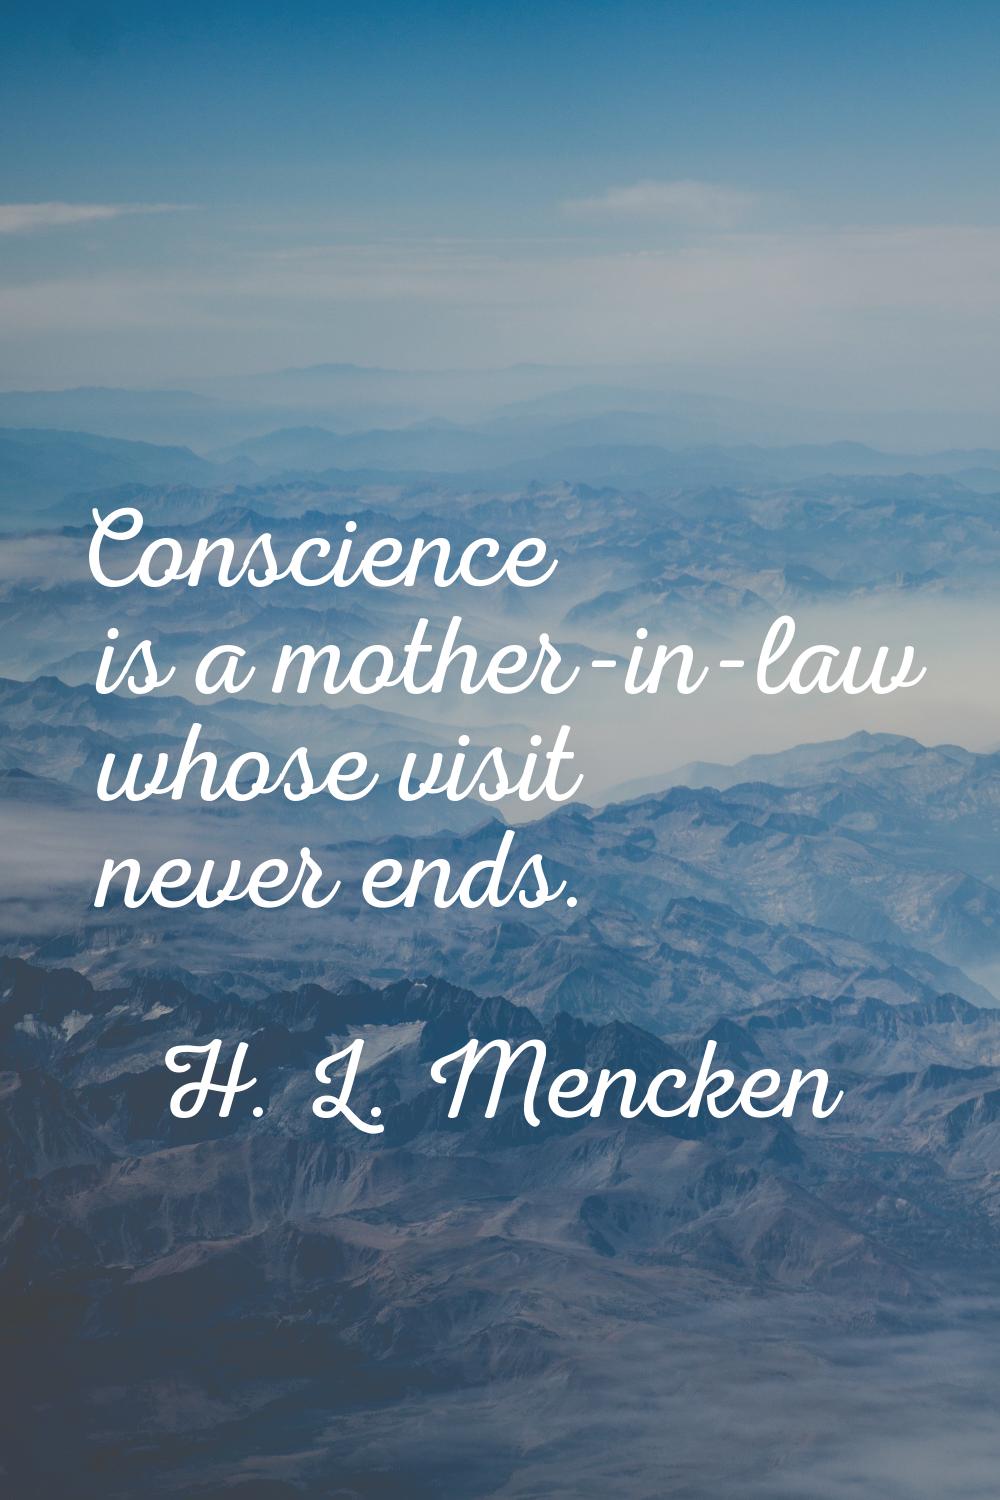 Conscience is a mother-in-law whose visit never ends.